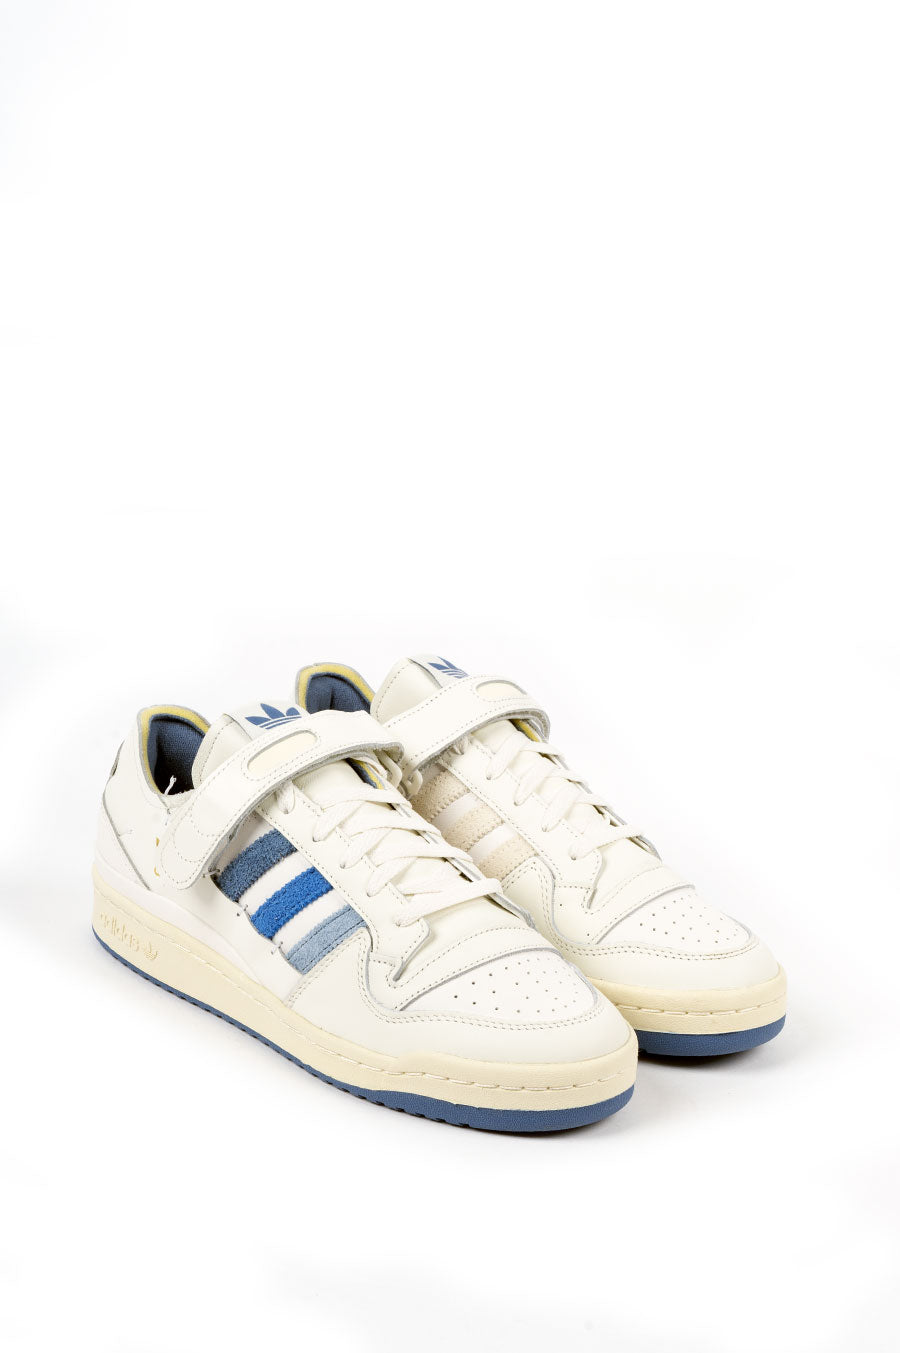 ADIDAS FORUM 84 LOW CLOUD WHITE ALTERED BLUE